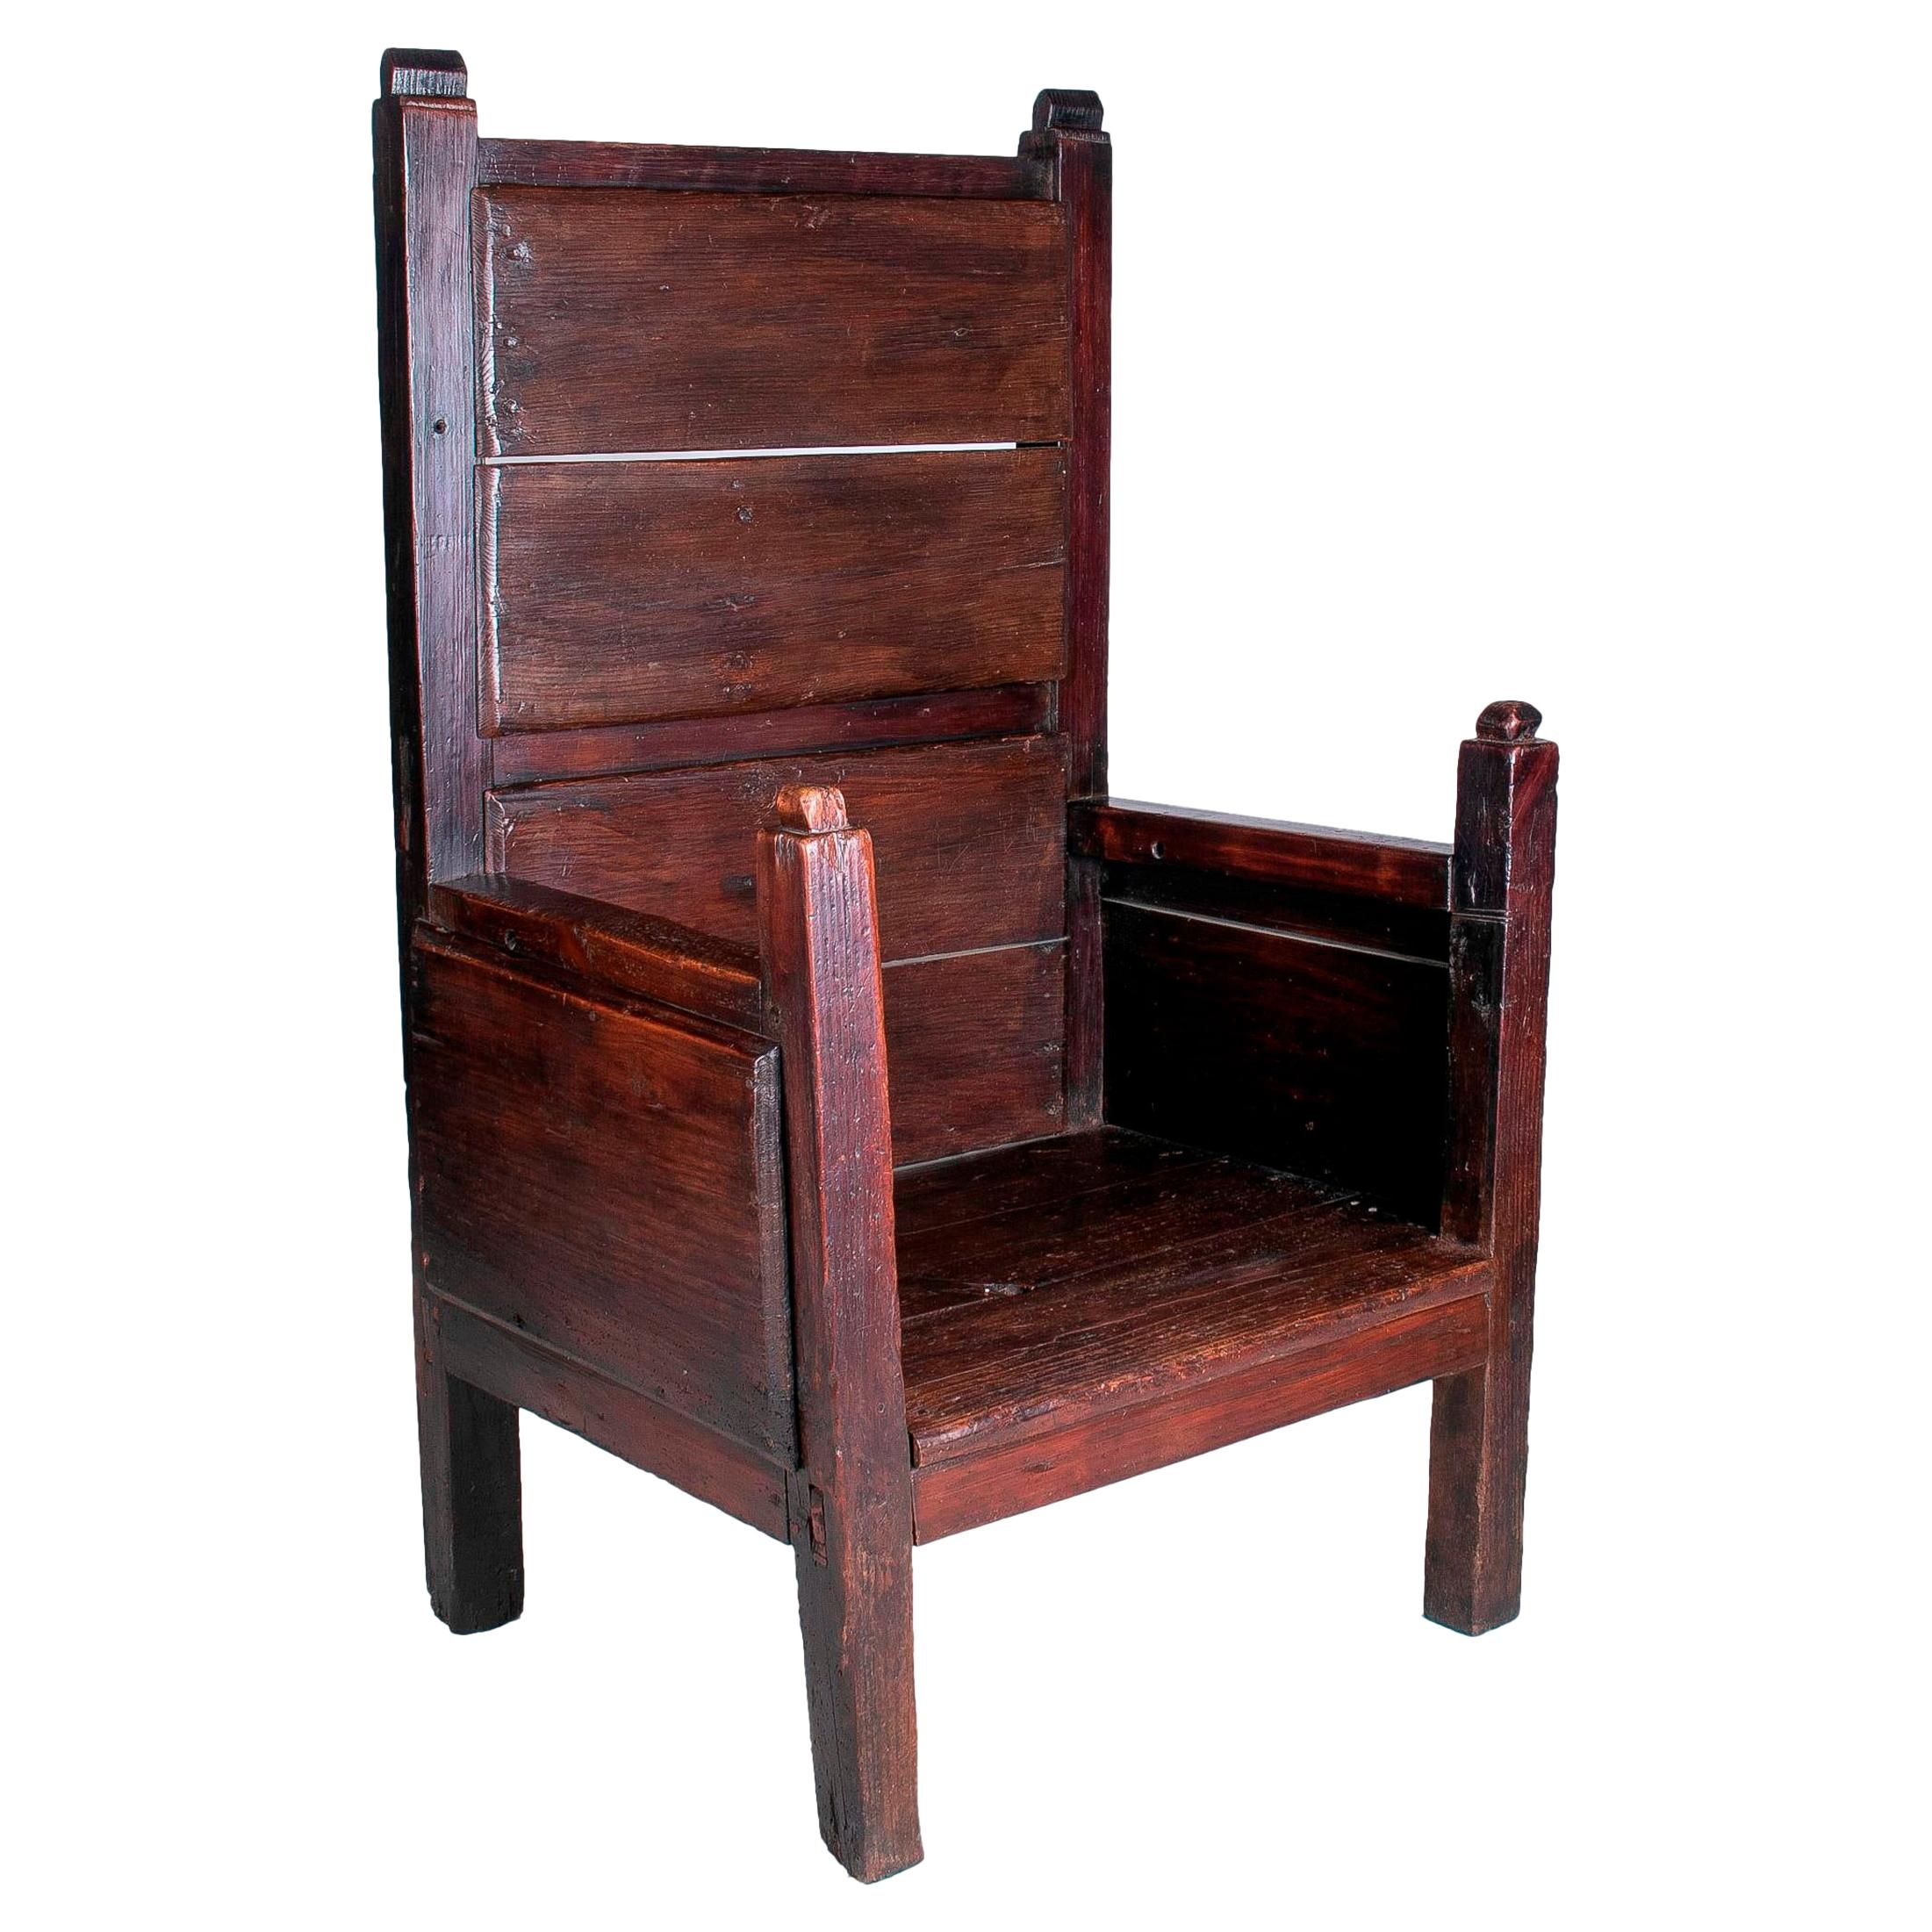 19th Century Spanish Handmade Wooden Sofa Chair w/ Tall Back For Sale